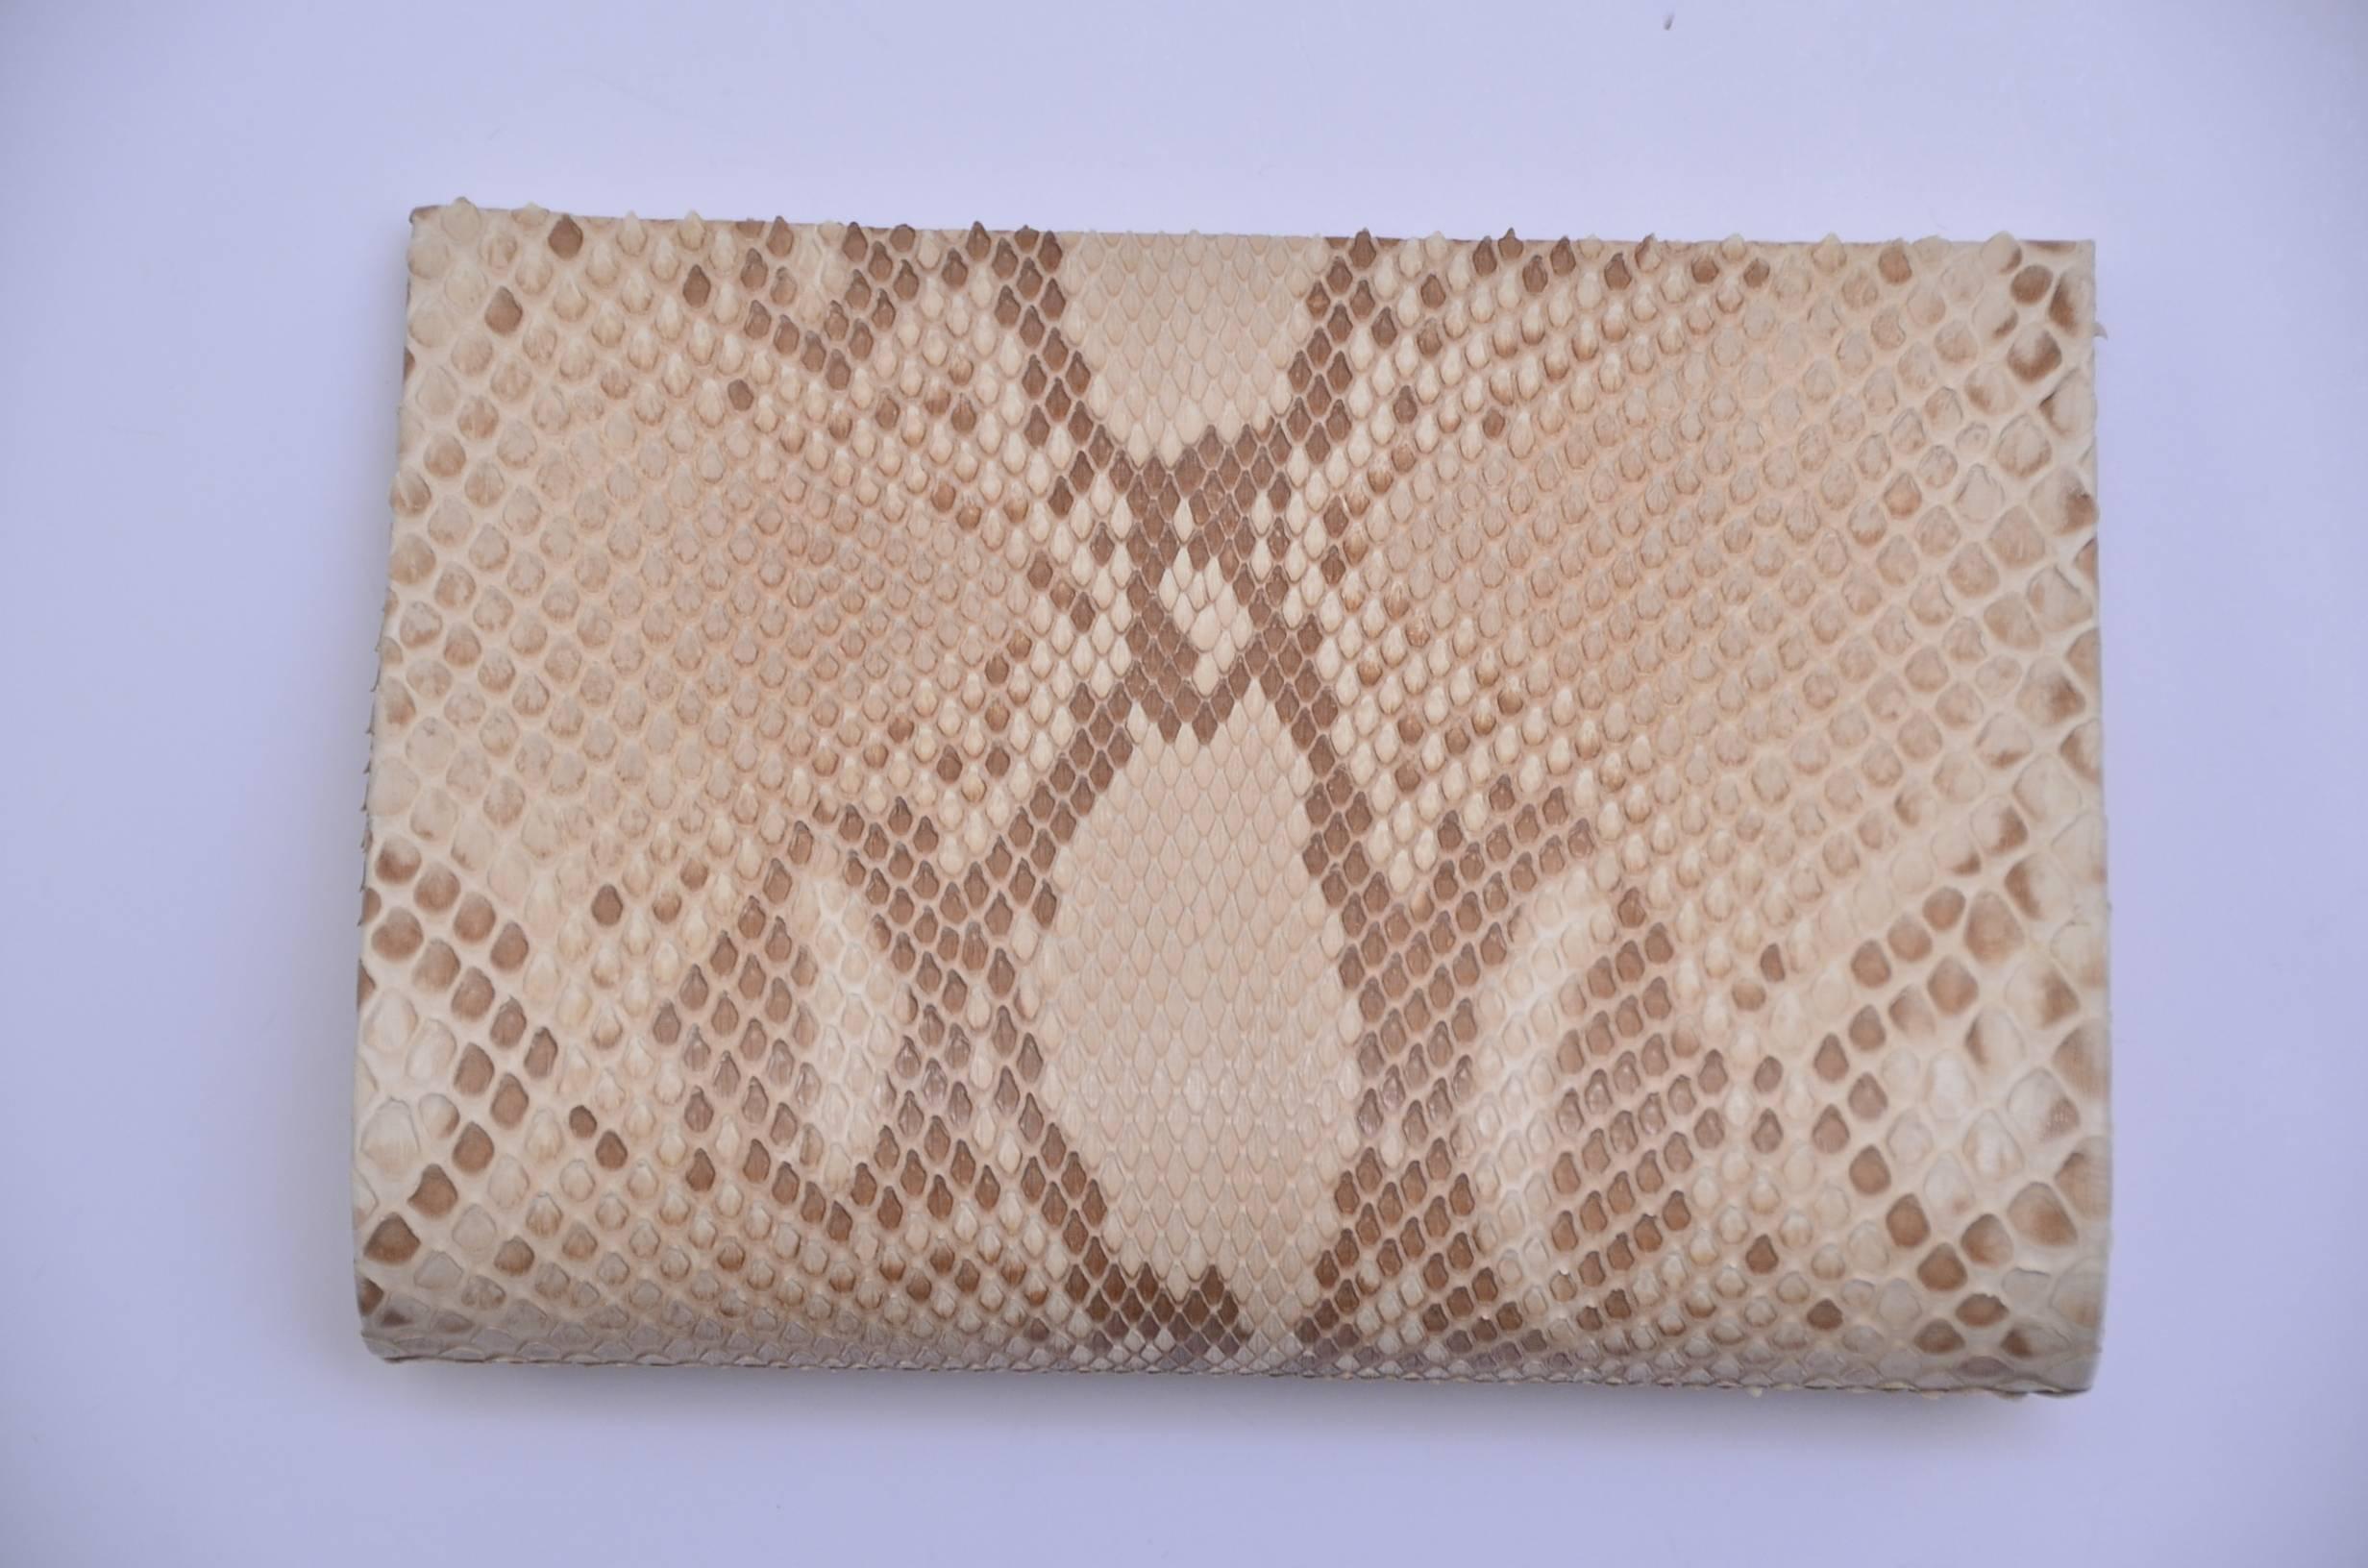 Paige Gamble medium size snake skin clutch.
Excellent new condition.
Made in New York.
Original box included.
Approximate measure:
L 8